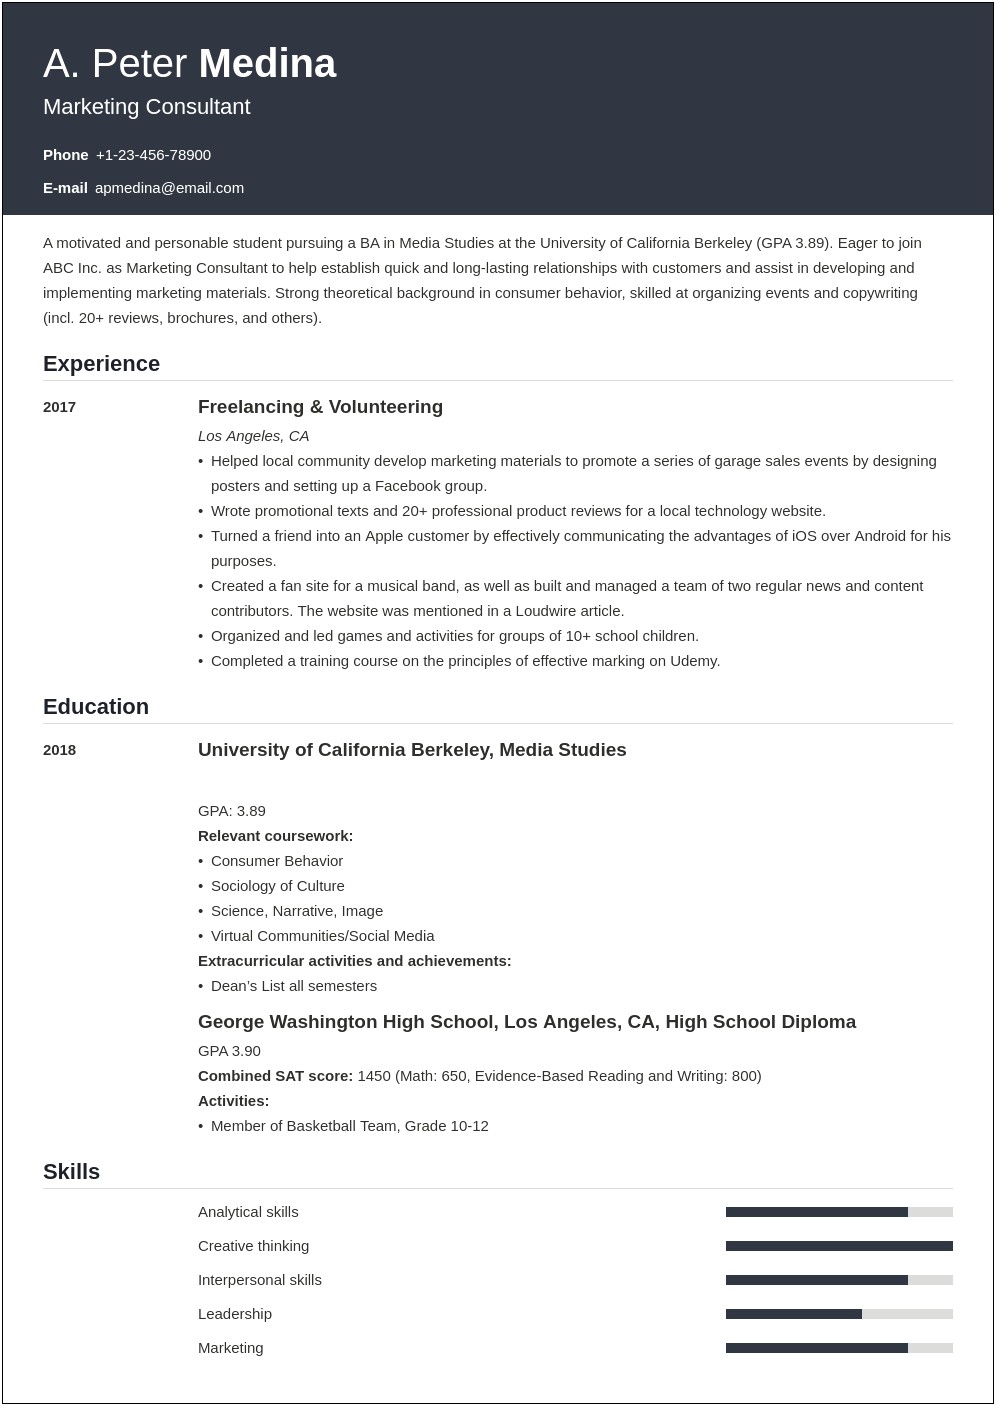 Resume Objective Statement No Experience